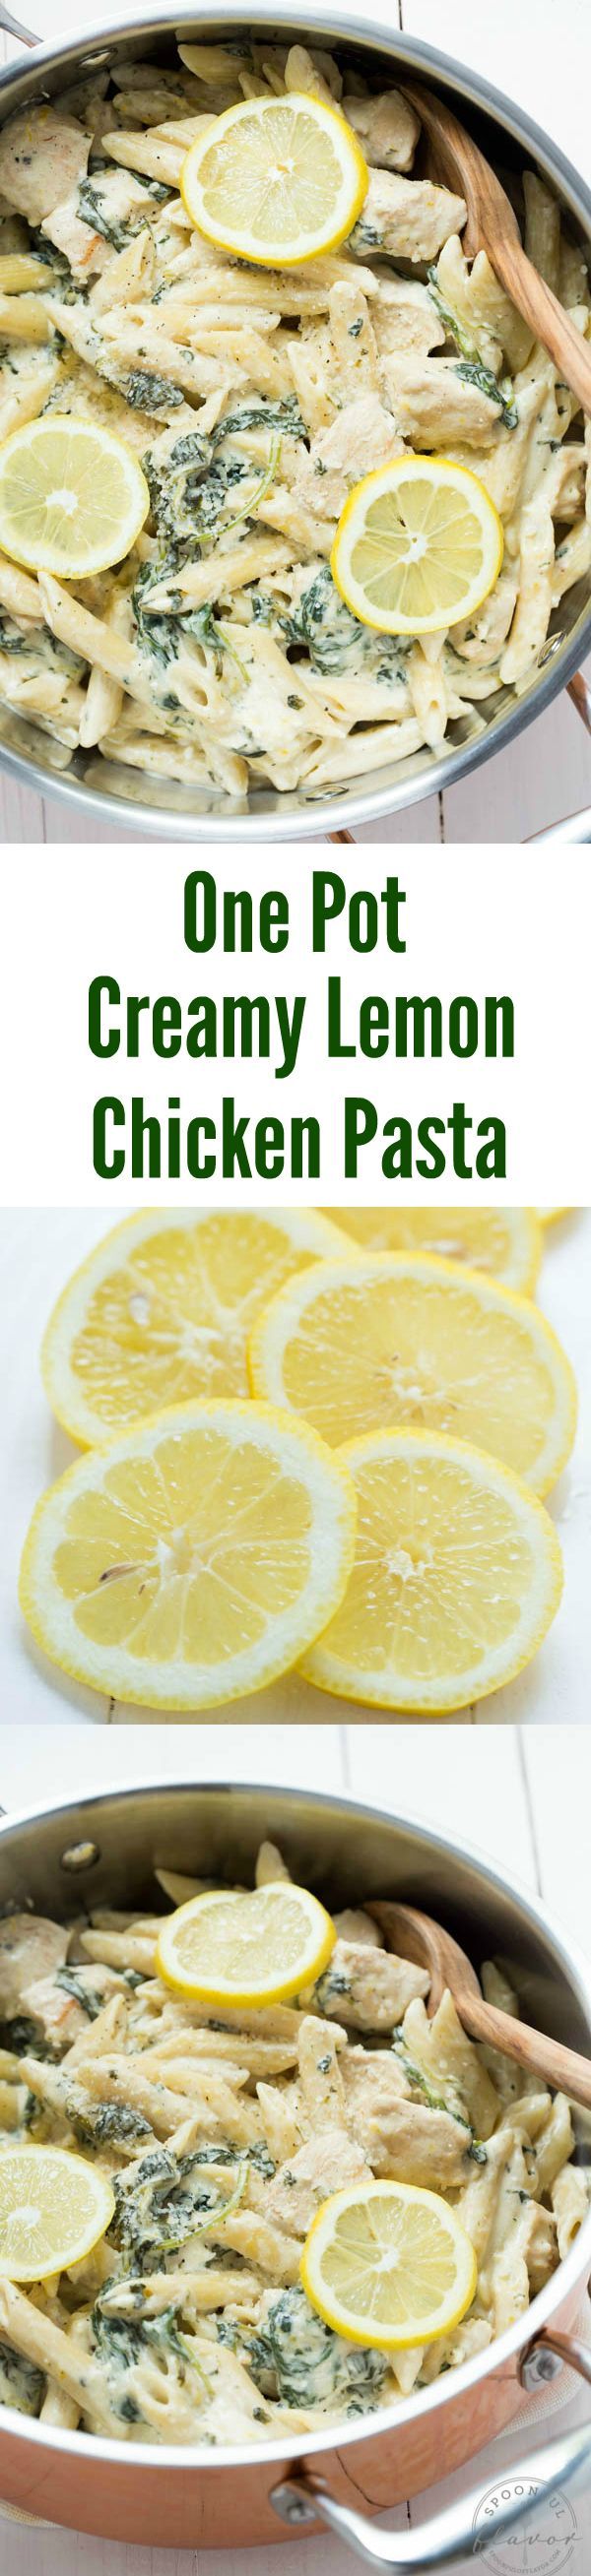 One Pot Creamy Lemon Chicken Pasta with Baby Kale – this is a meal that the entire family will love!